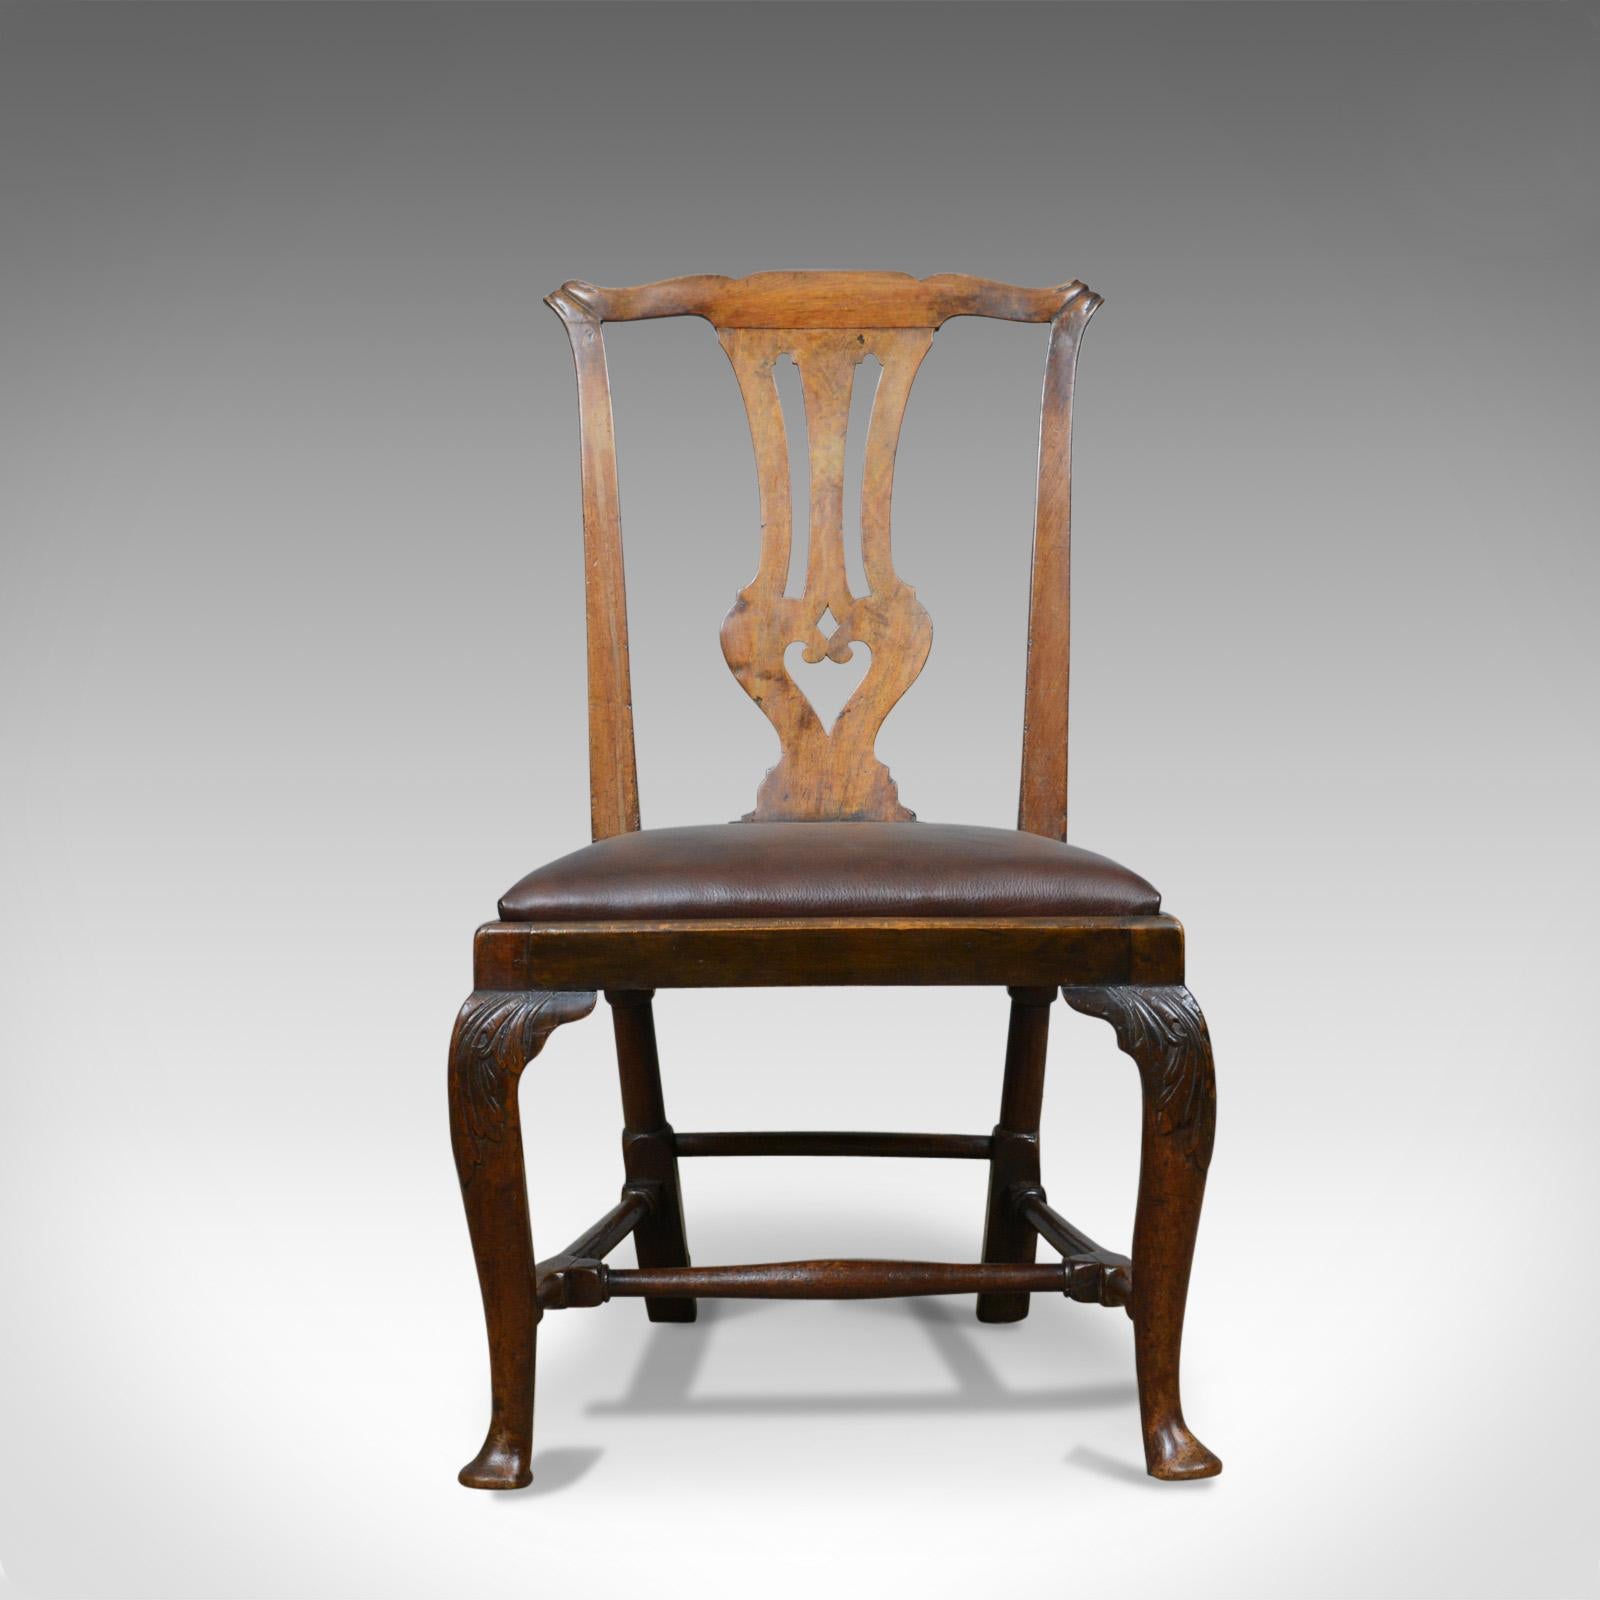 This is a Georgian antique chair. An English, mahogany, mid-18th century side chair dating.

Of Classic Georgian form
In select mahogany with a deep lustre and desirable aged patina
Classic transitional piece into Chippendale